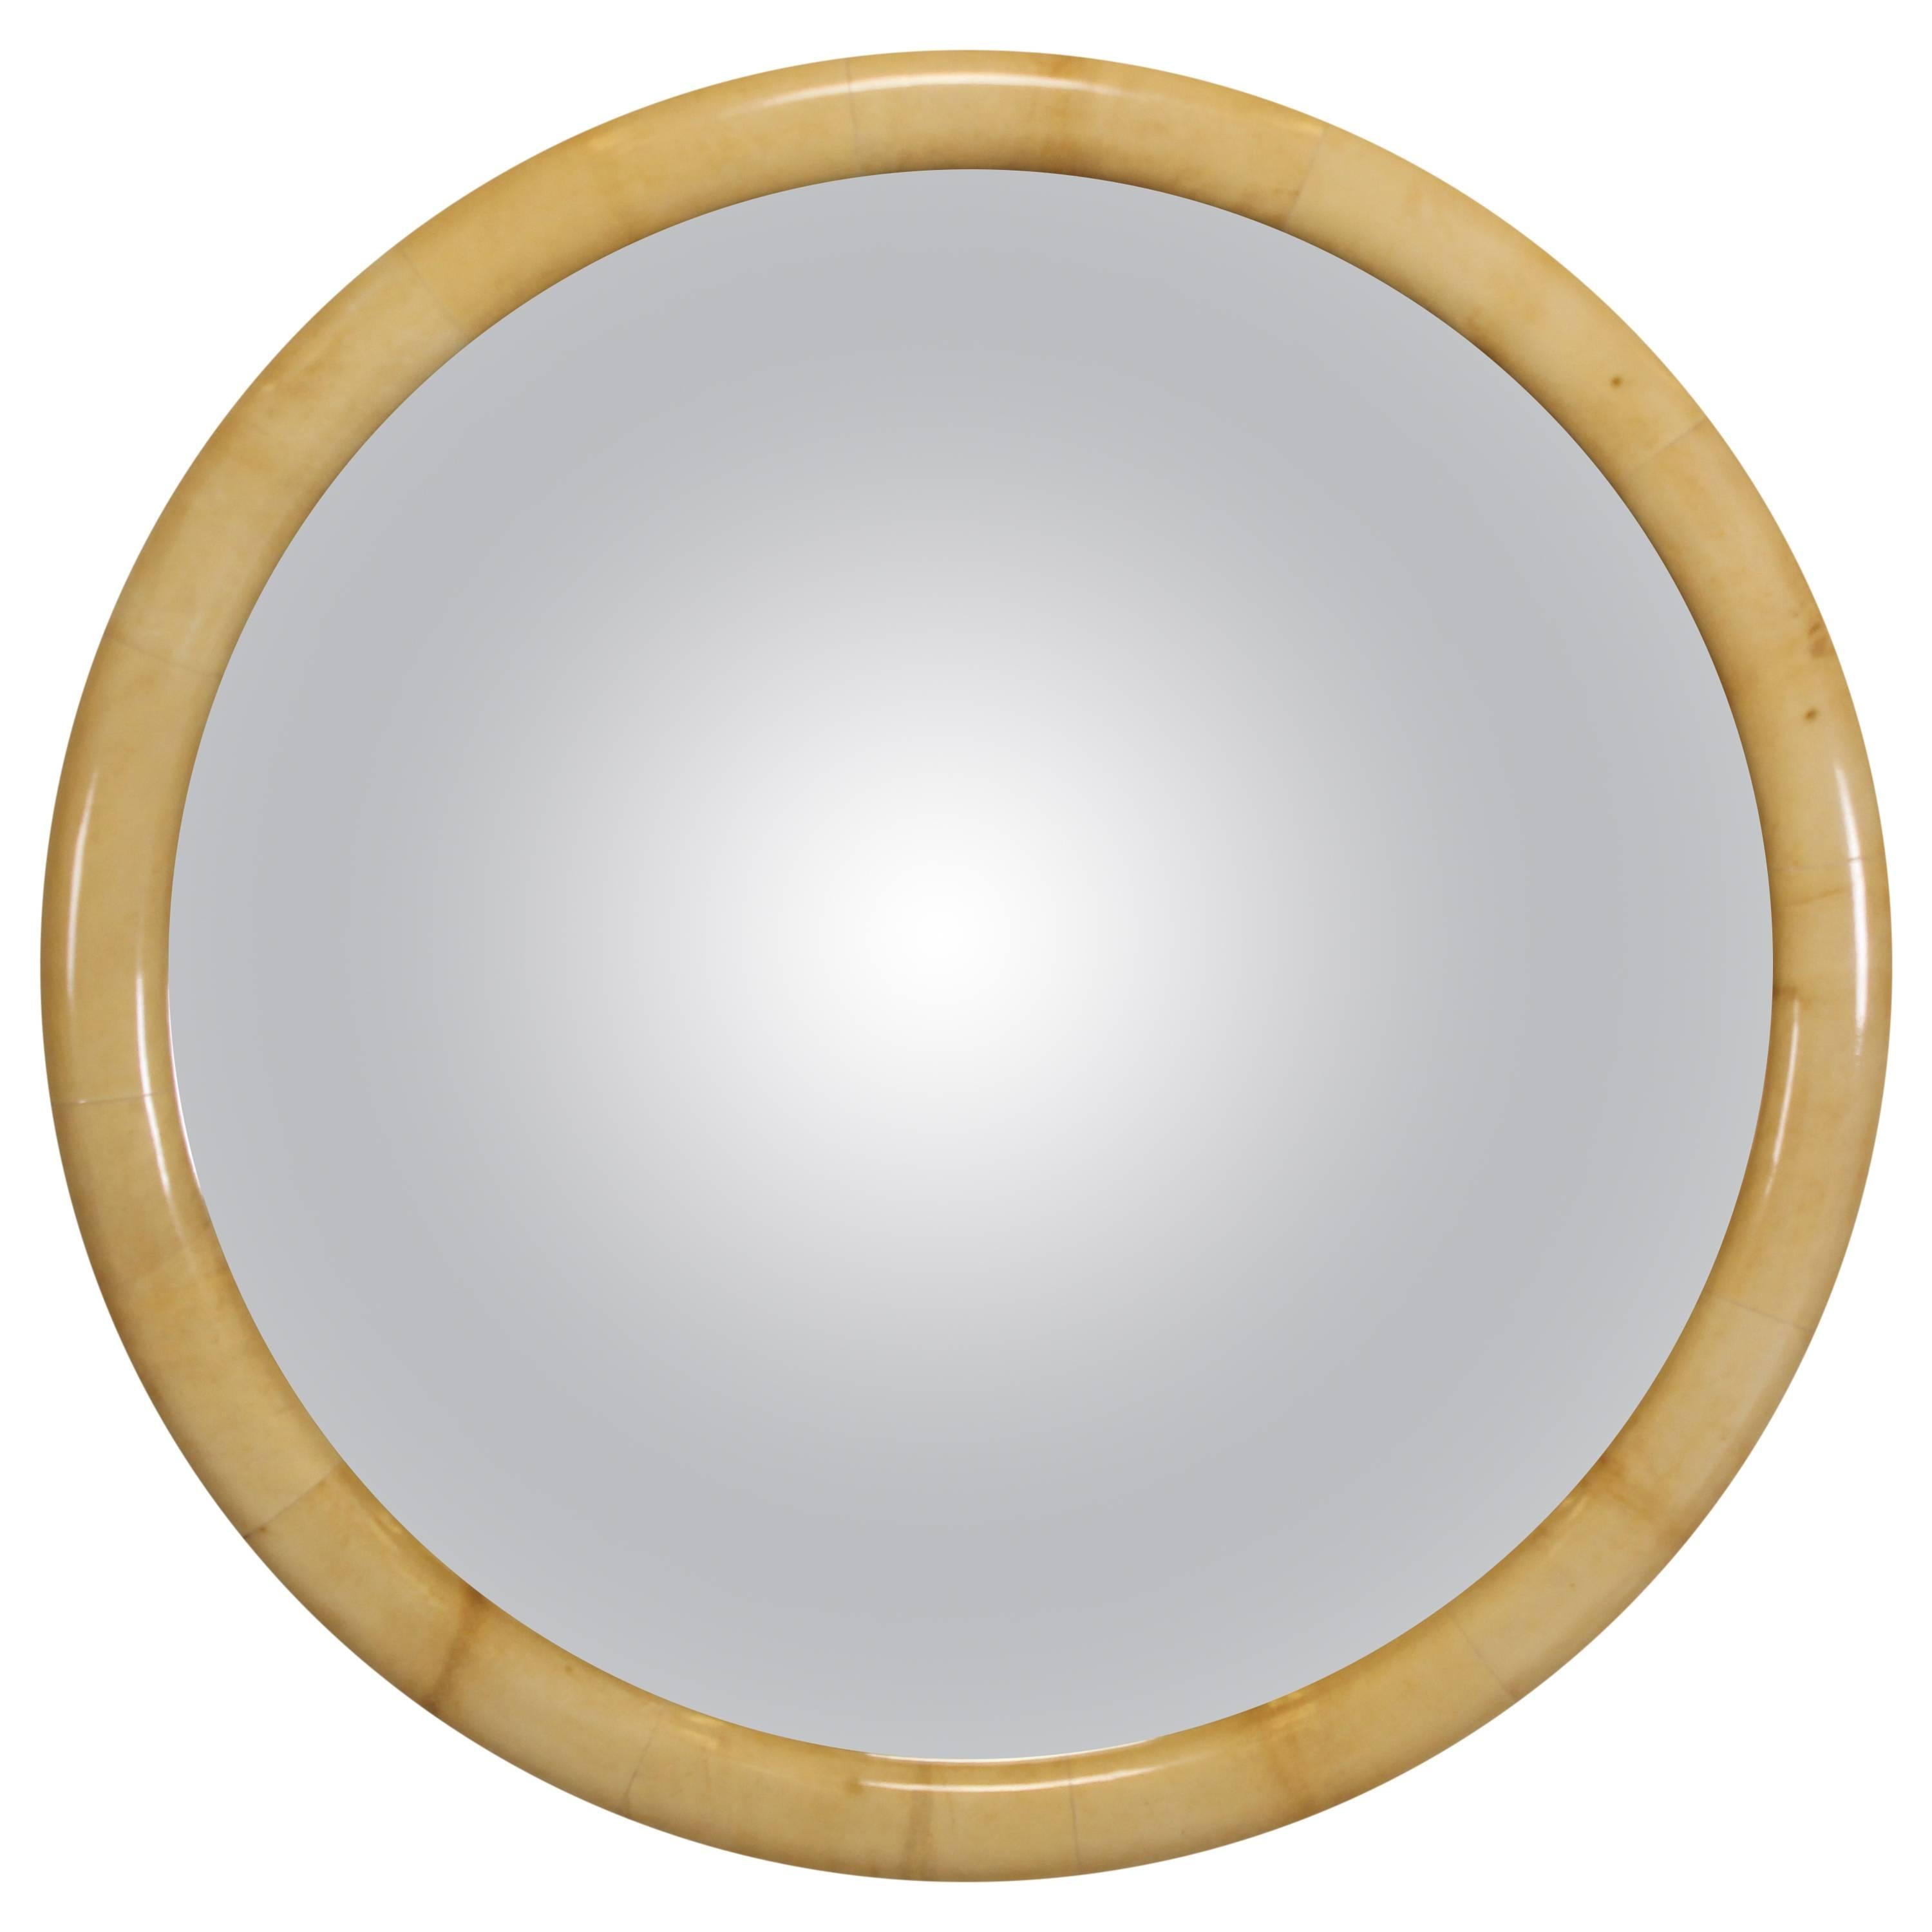 Parchment "Cider Crest" Mirror in the Style of Karl Springer, 1980